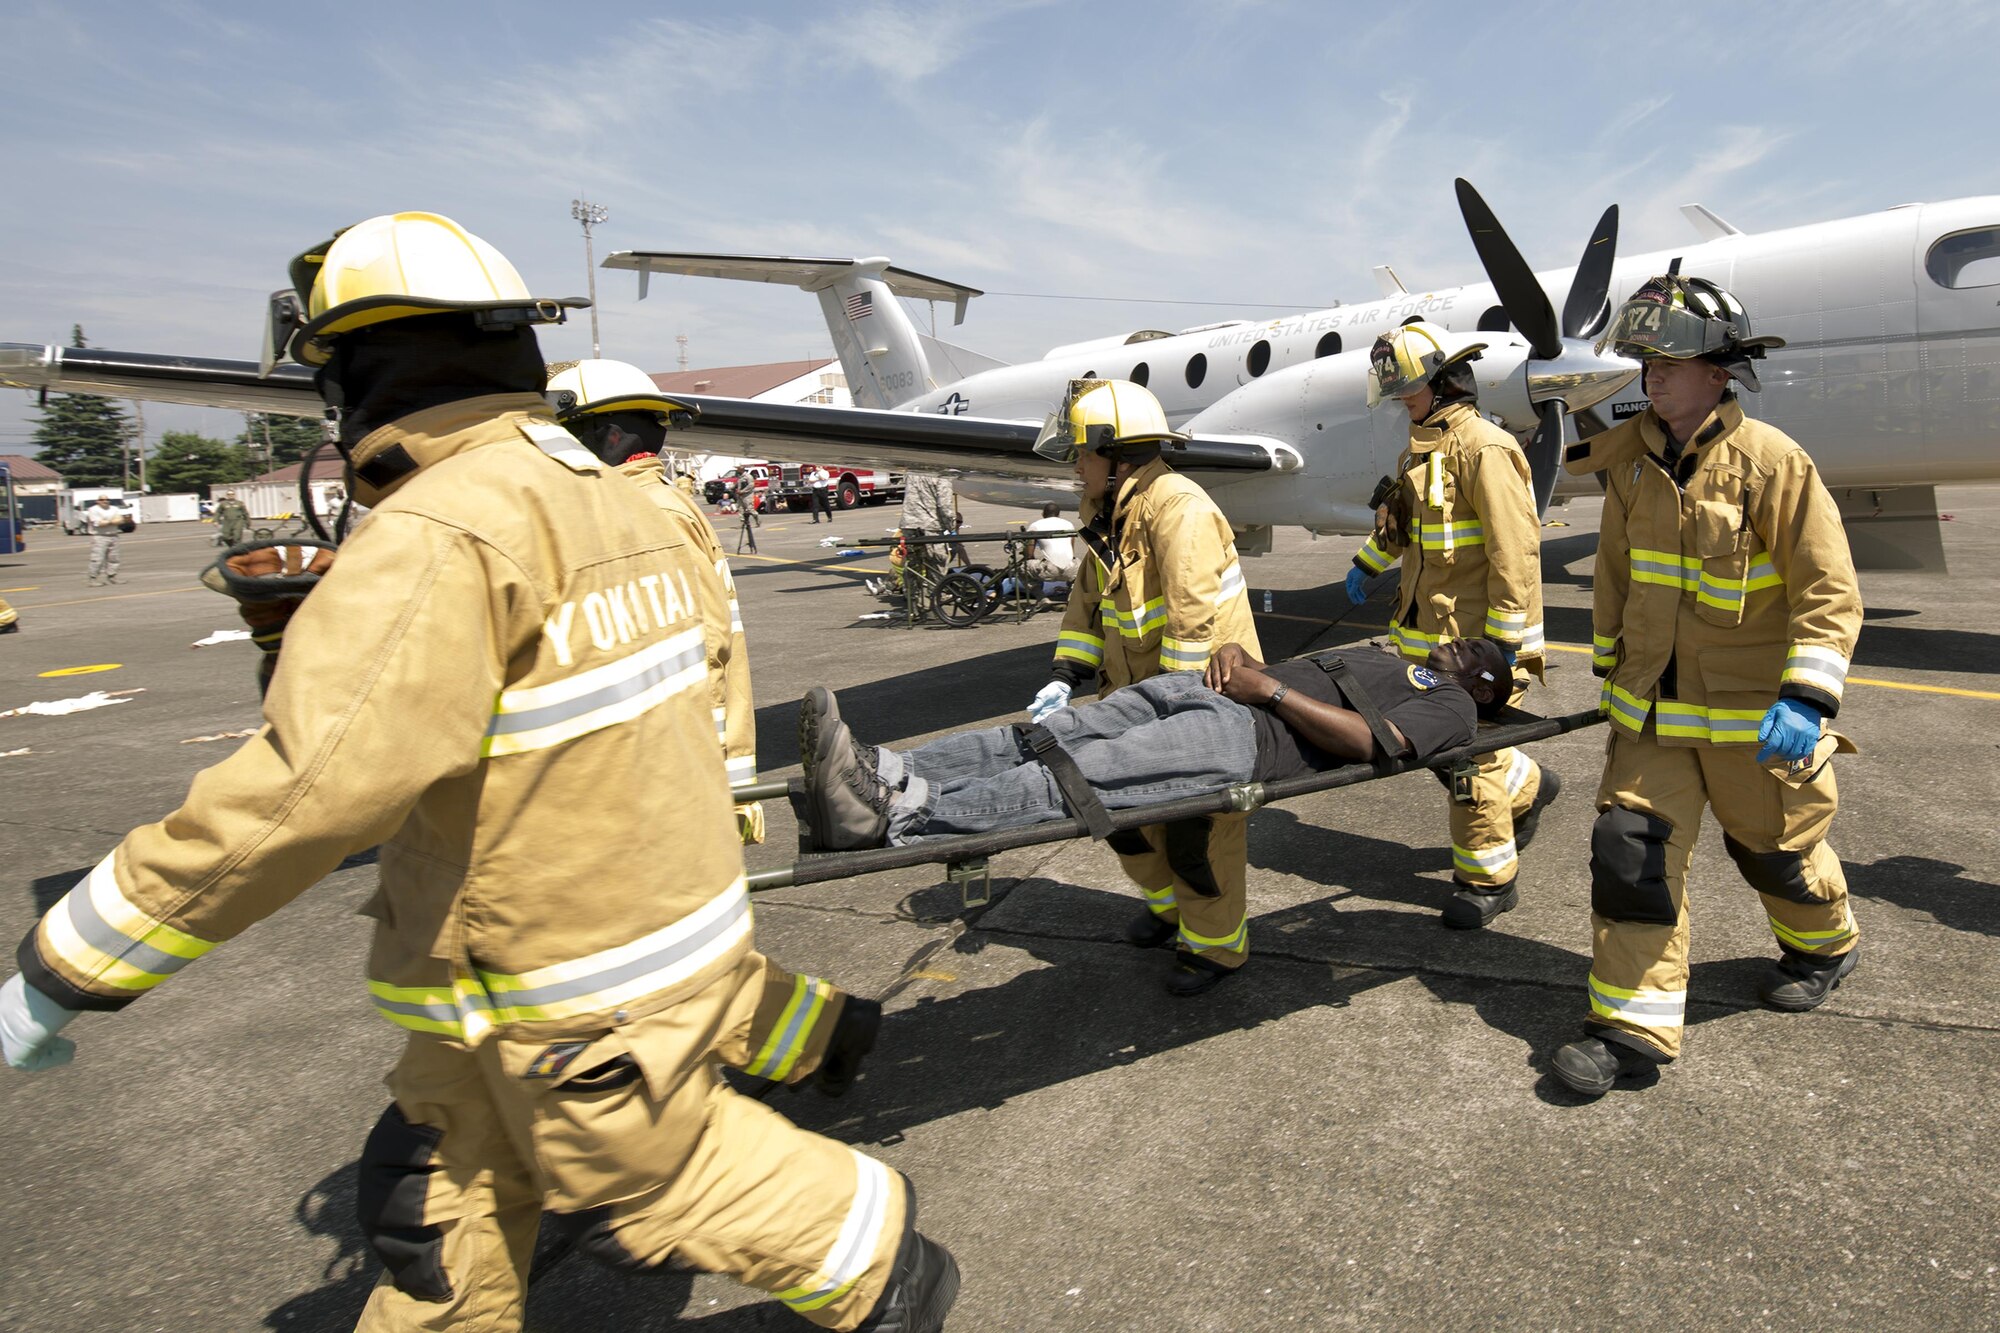 Yokota firefighters transport a simulated victim from an aircraft clash site during an Emergency Management Exercise at Yokota Air Base, Japan, July 13, 2015. Yokota conducted a Samurai Readiness Training Week to enhance readiness for real-world situations. (U.S. Air Force photo by Osakabe Yasuo/Released)
